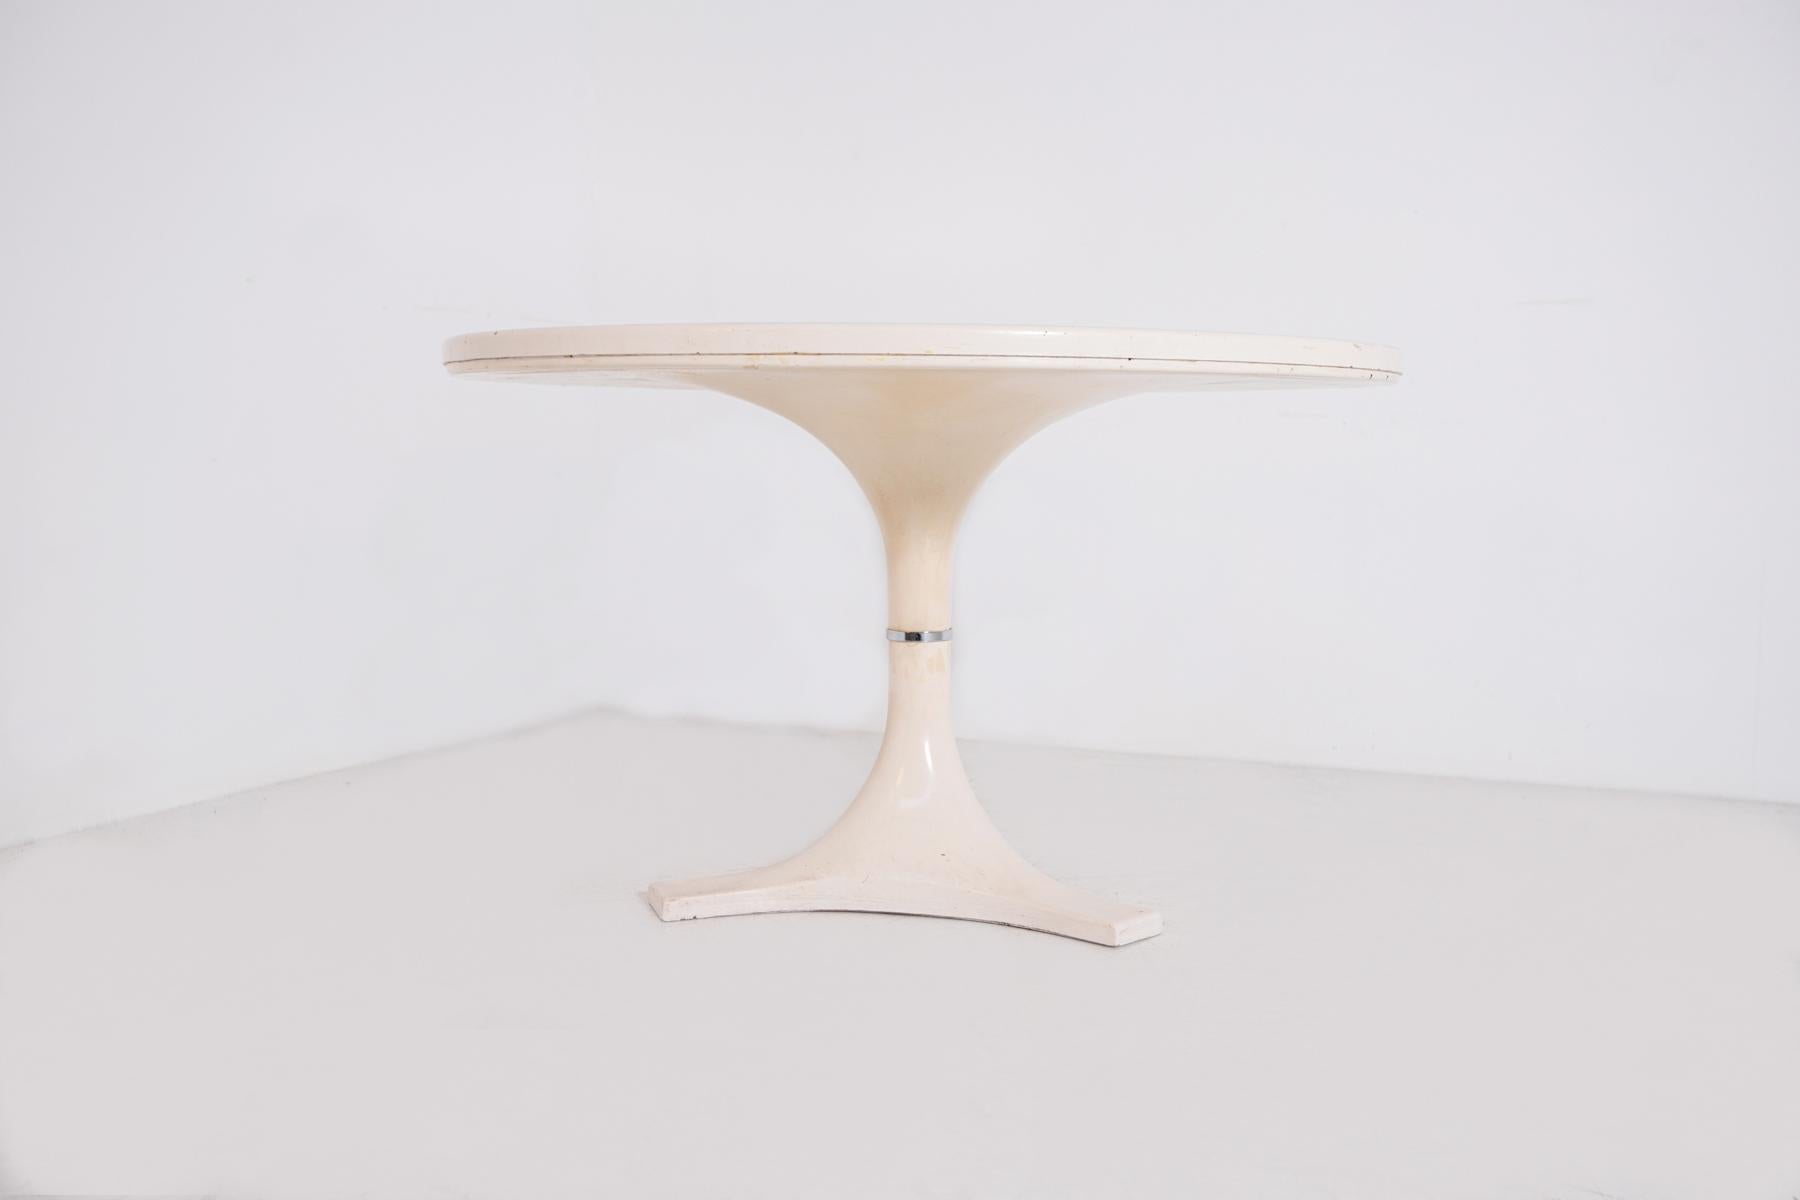 Beautiful table designed by Ignazio Gardella and his wife Anna Castelli Ferrieri for Kartell in 1966, model 4997.
The beautiful Kartell table was made of white polyester resin, reinforced with fiberglass, and chromed metal. Its continuous